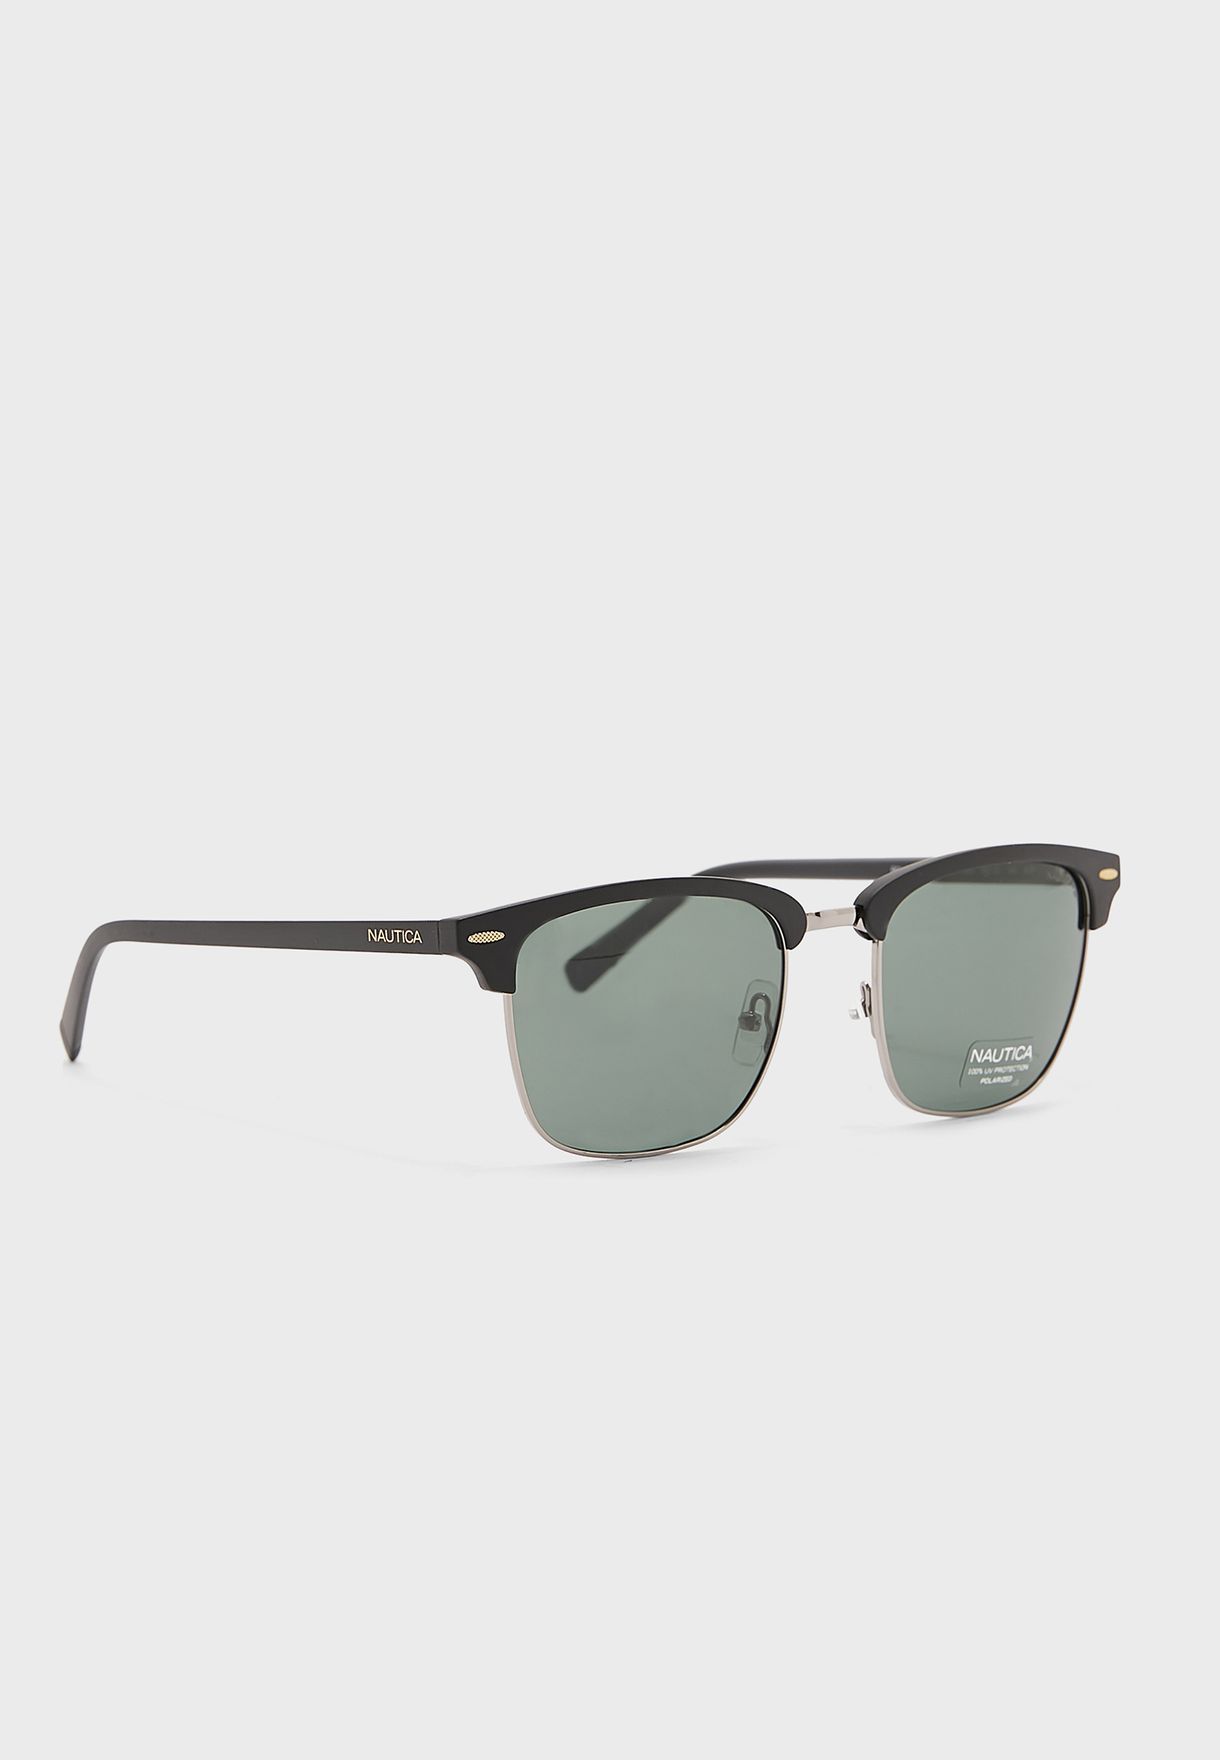 Clubmasters Sunglasses